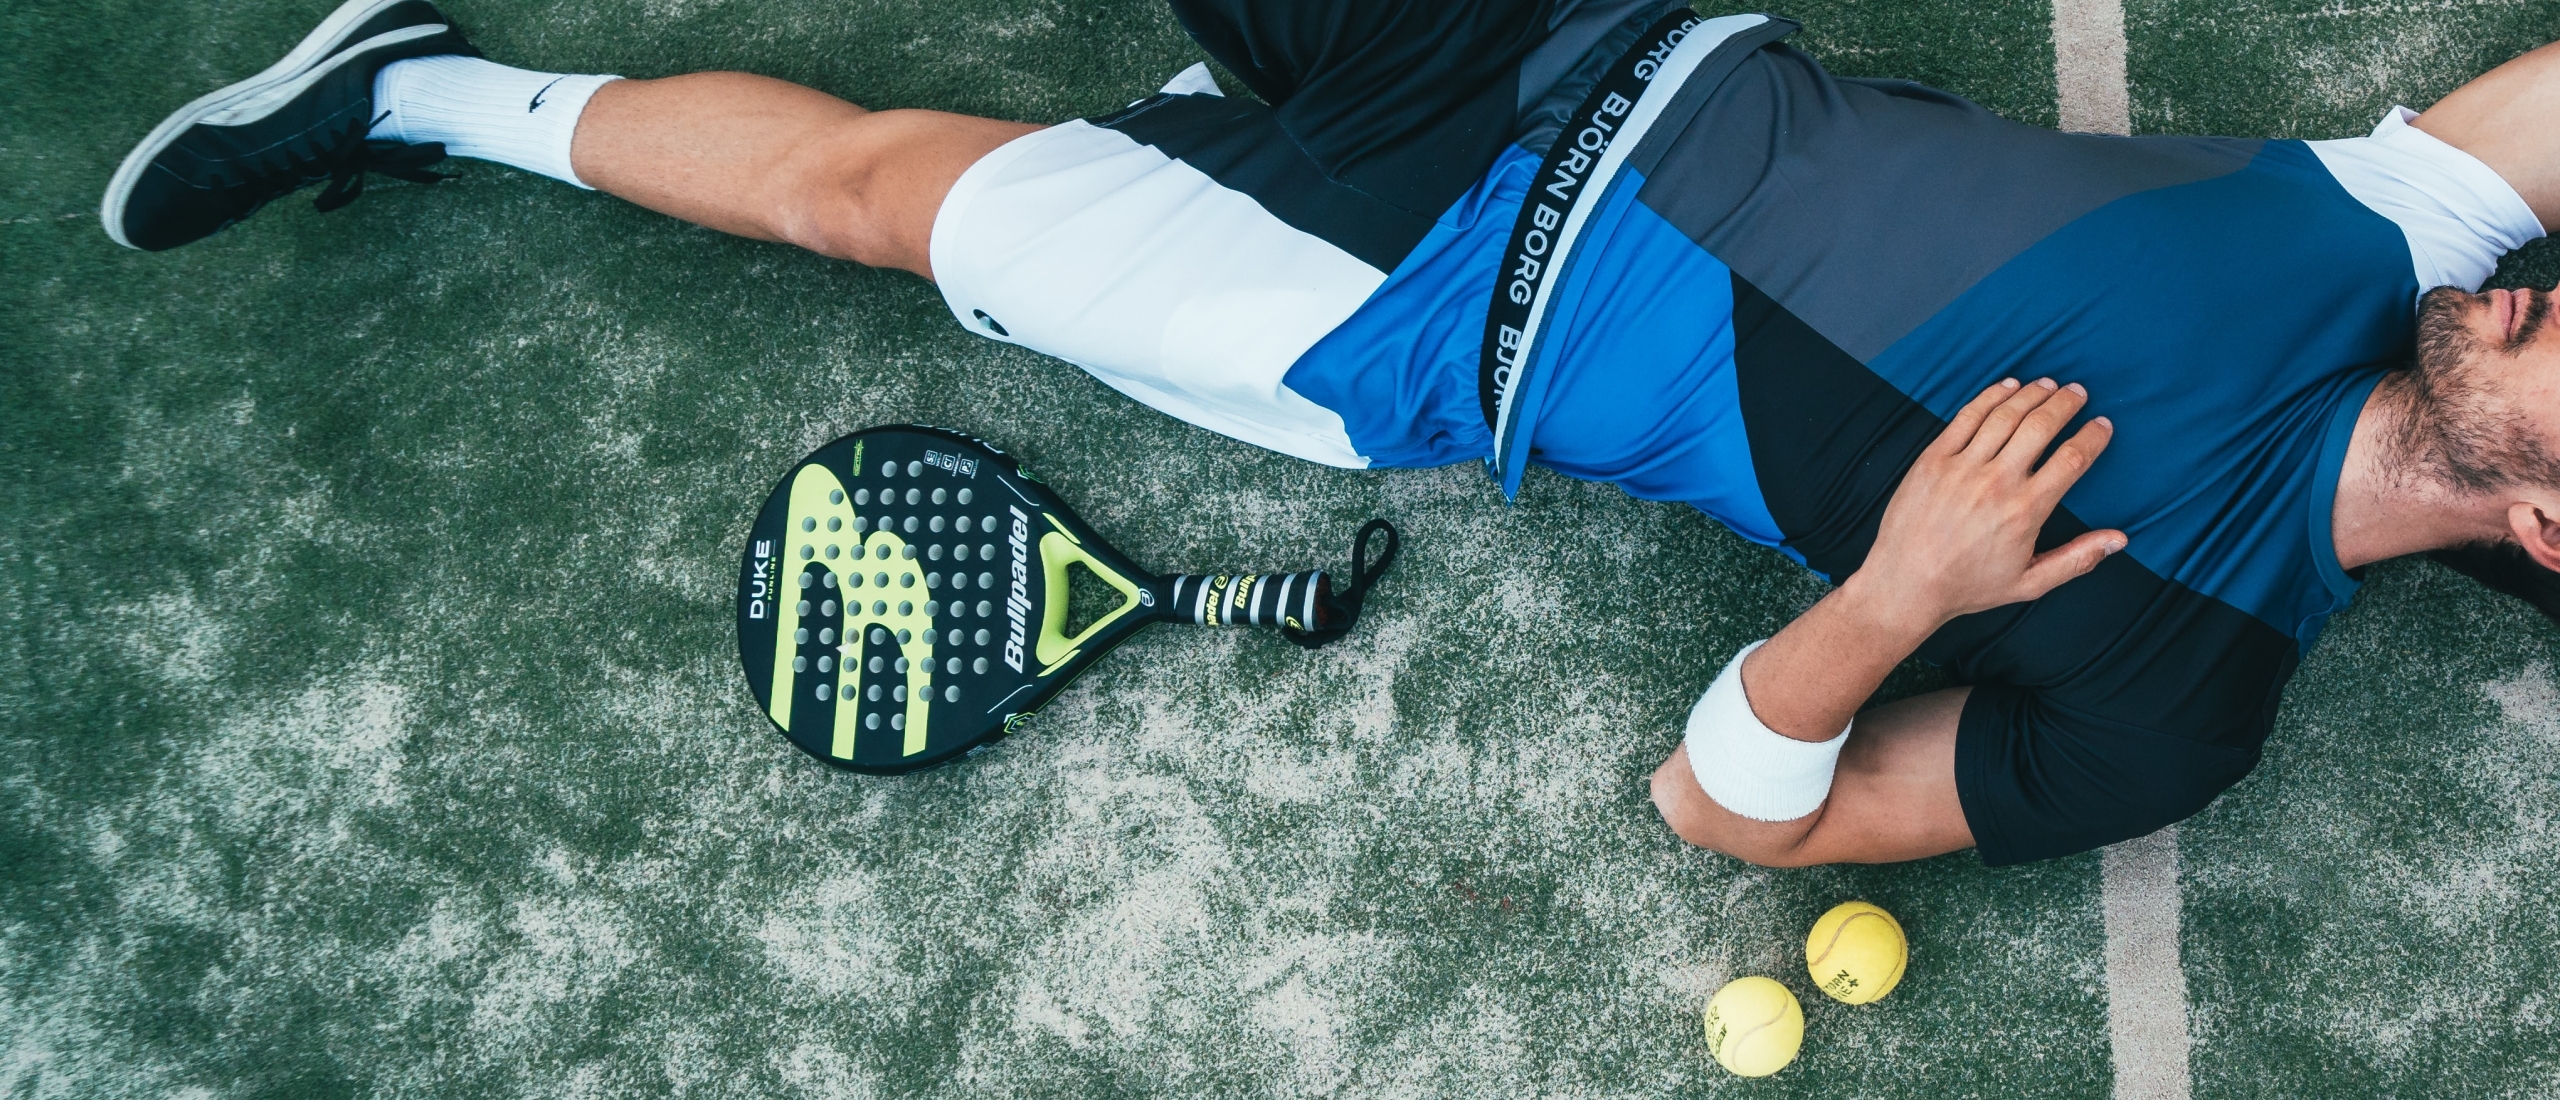 Starting Padel? – Here’s what you need!